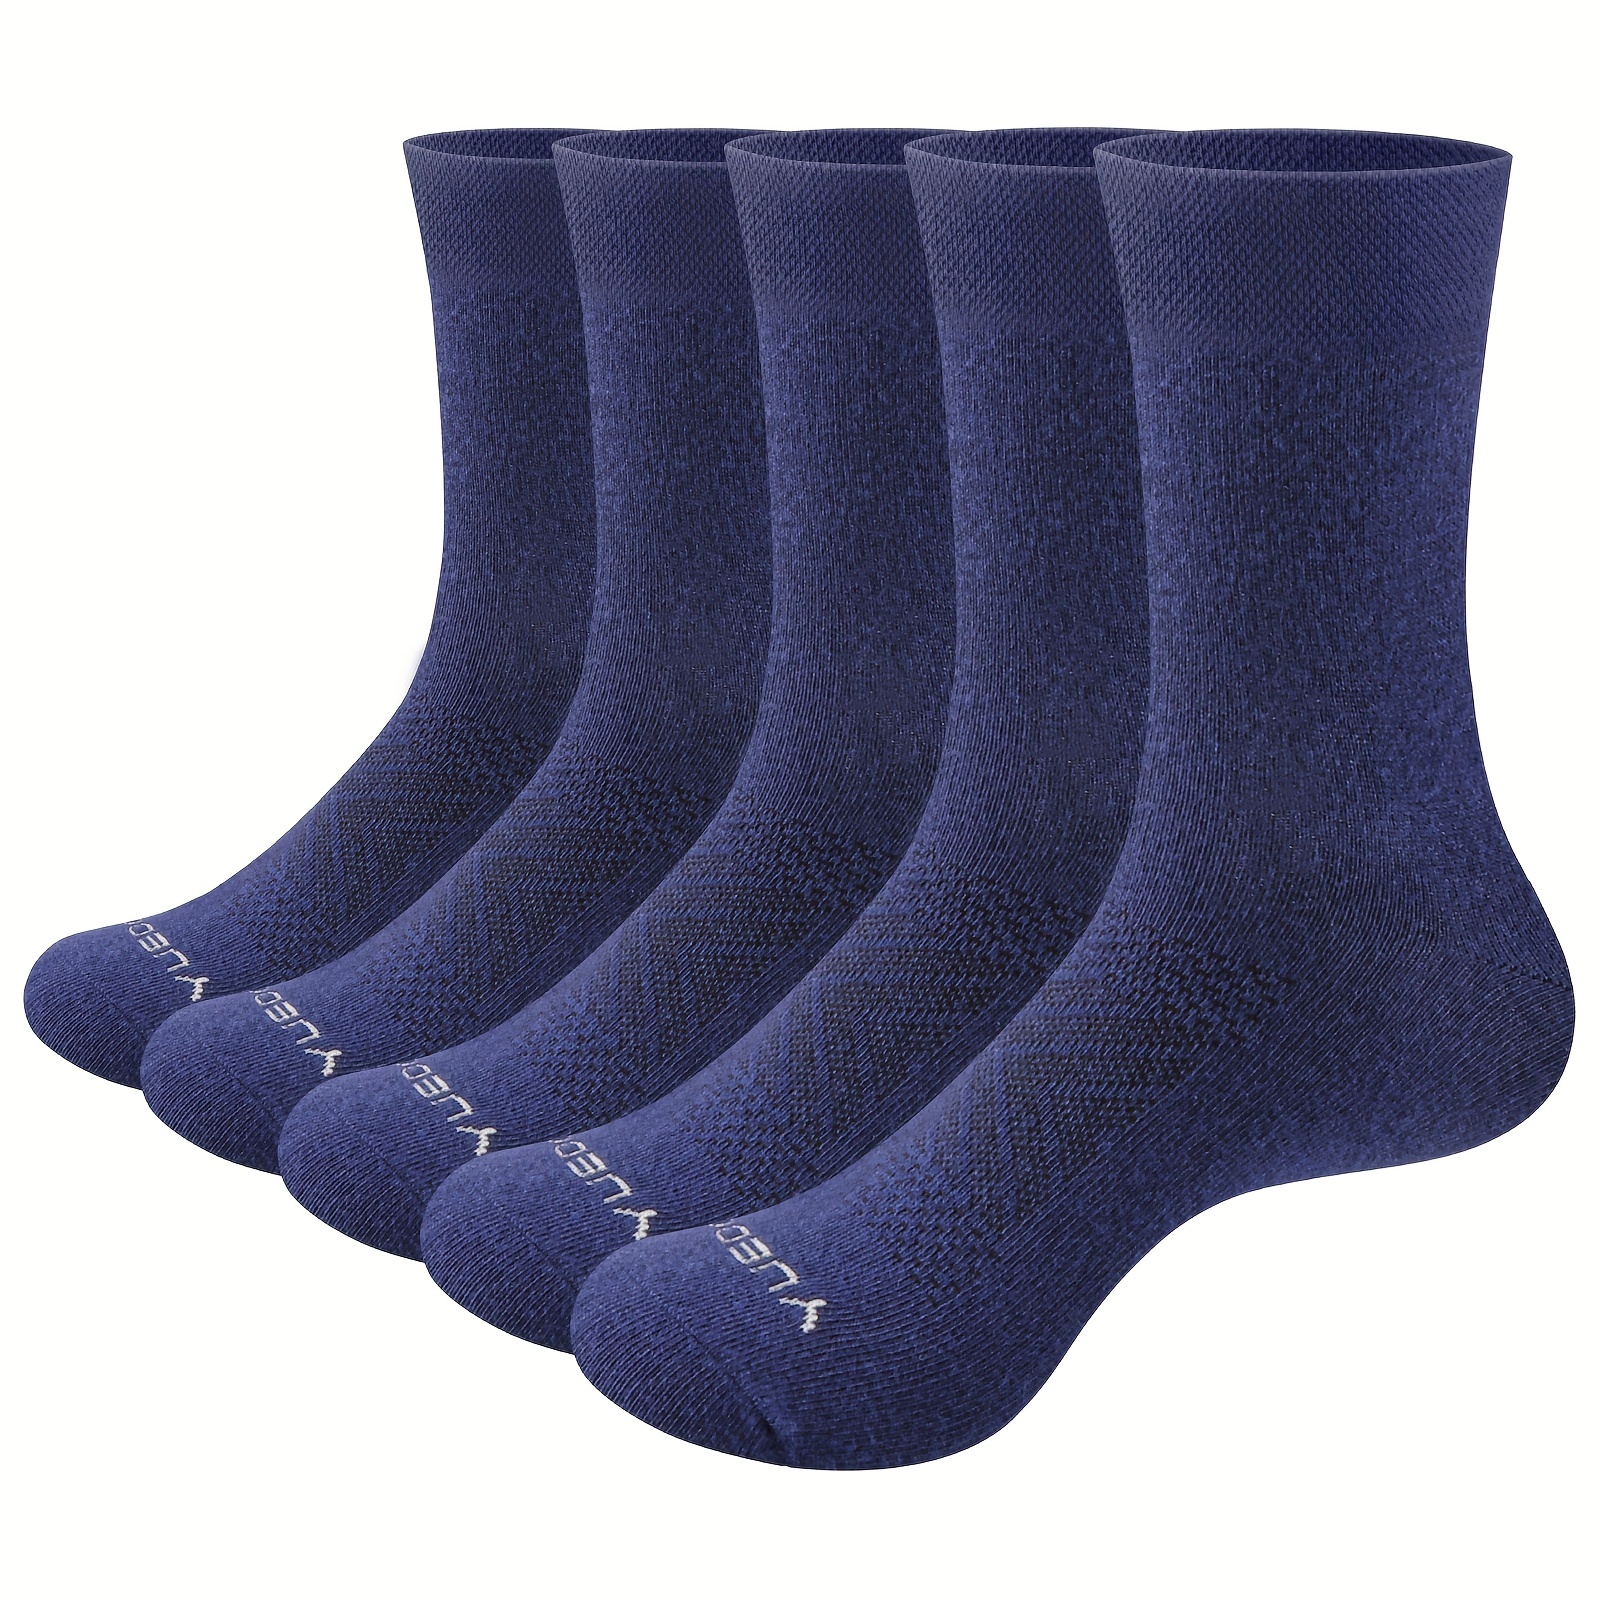 Hanes Women's Cozy Crew Socks, 6-Pairs Or/Pur/Blue Stripes/Solid